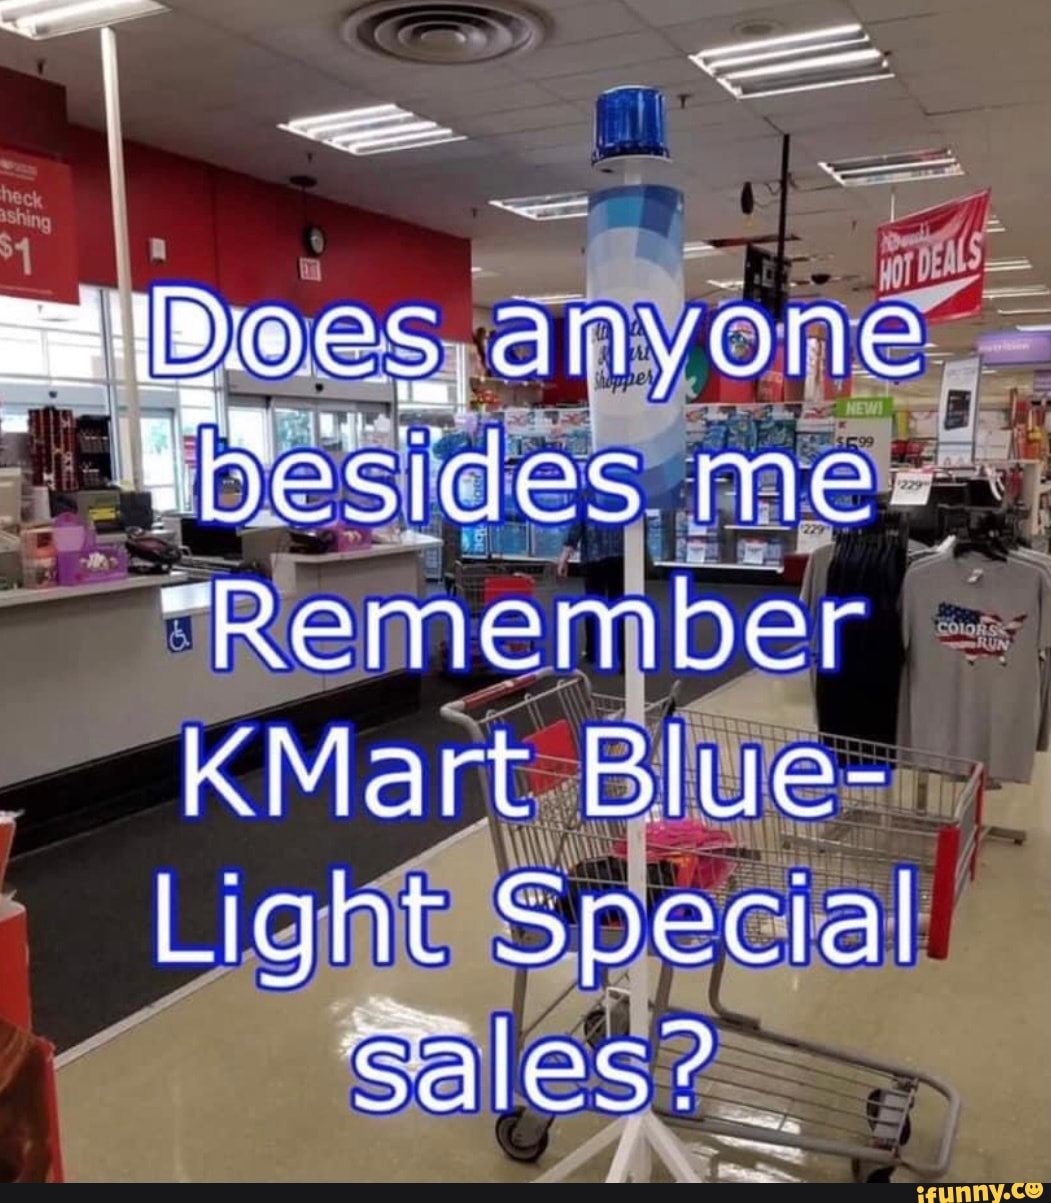 Az'D.oes anyone Besides me Remember KMart Blue- Light Special sales? -  iFunny Brazil